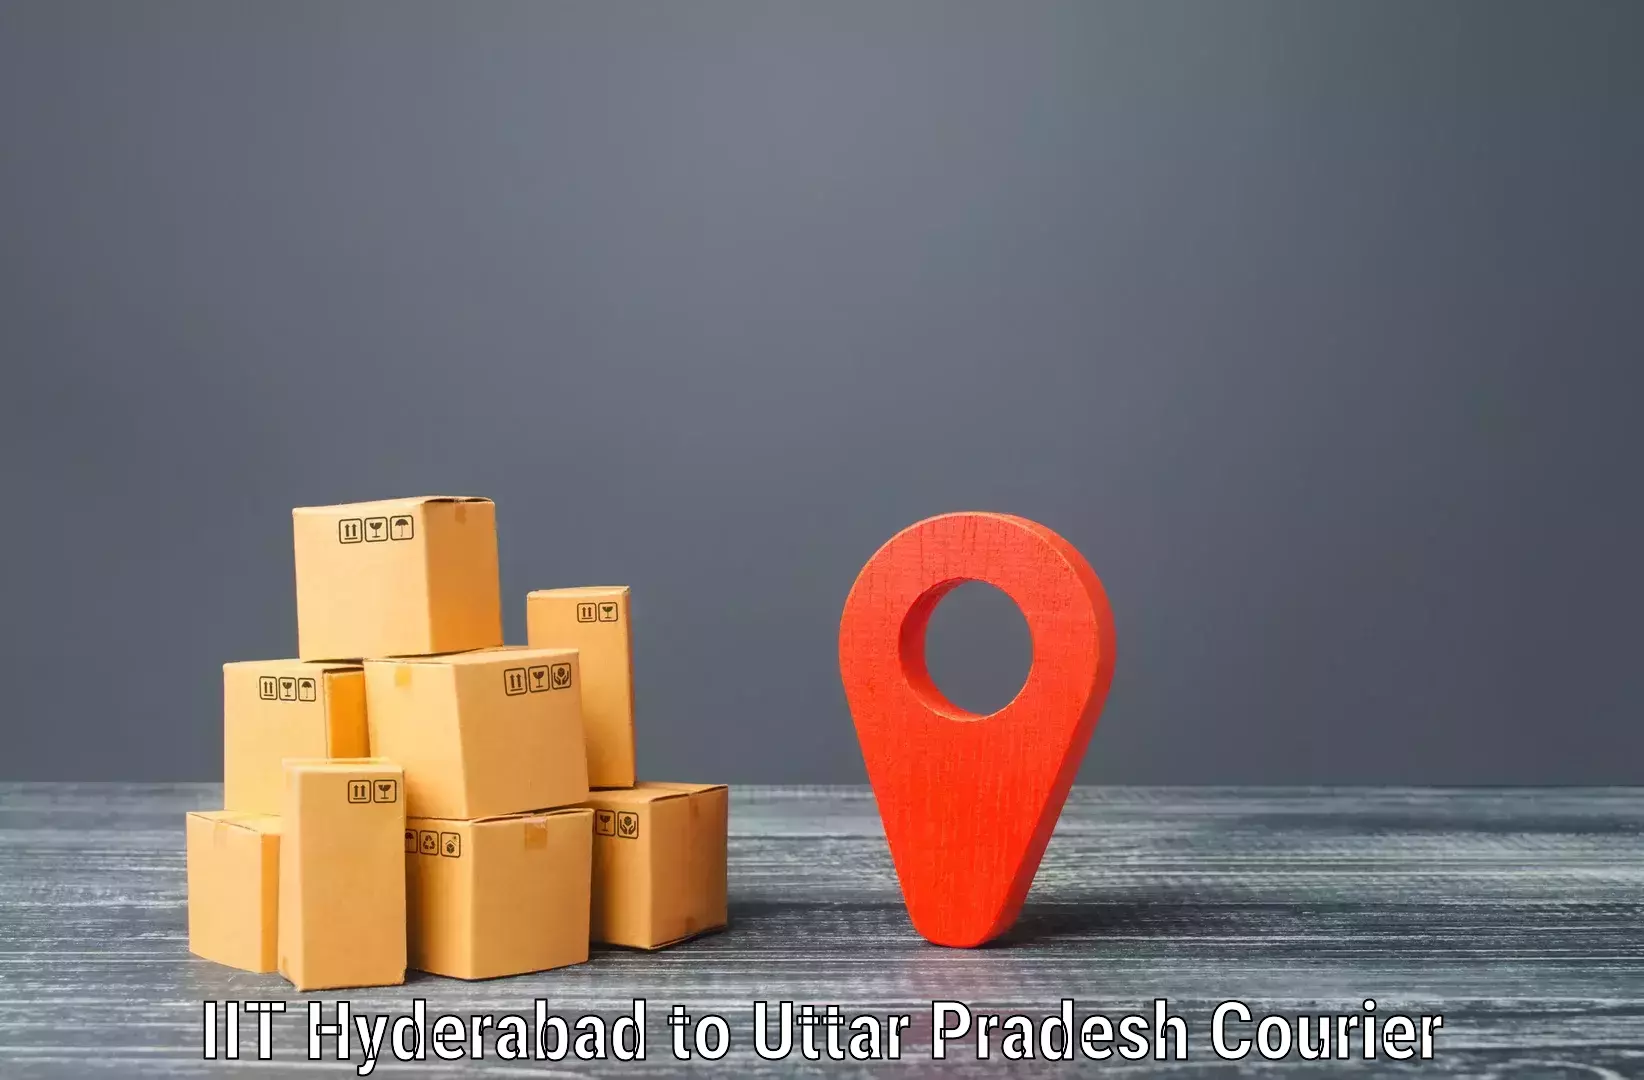 Large-scale shipping solutions in IIT Hyderabad to Uttar Pradesh